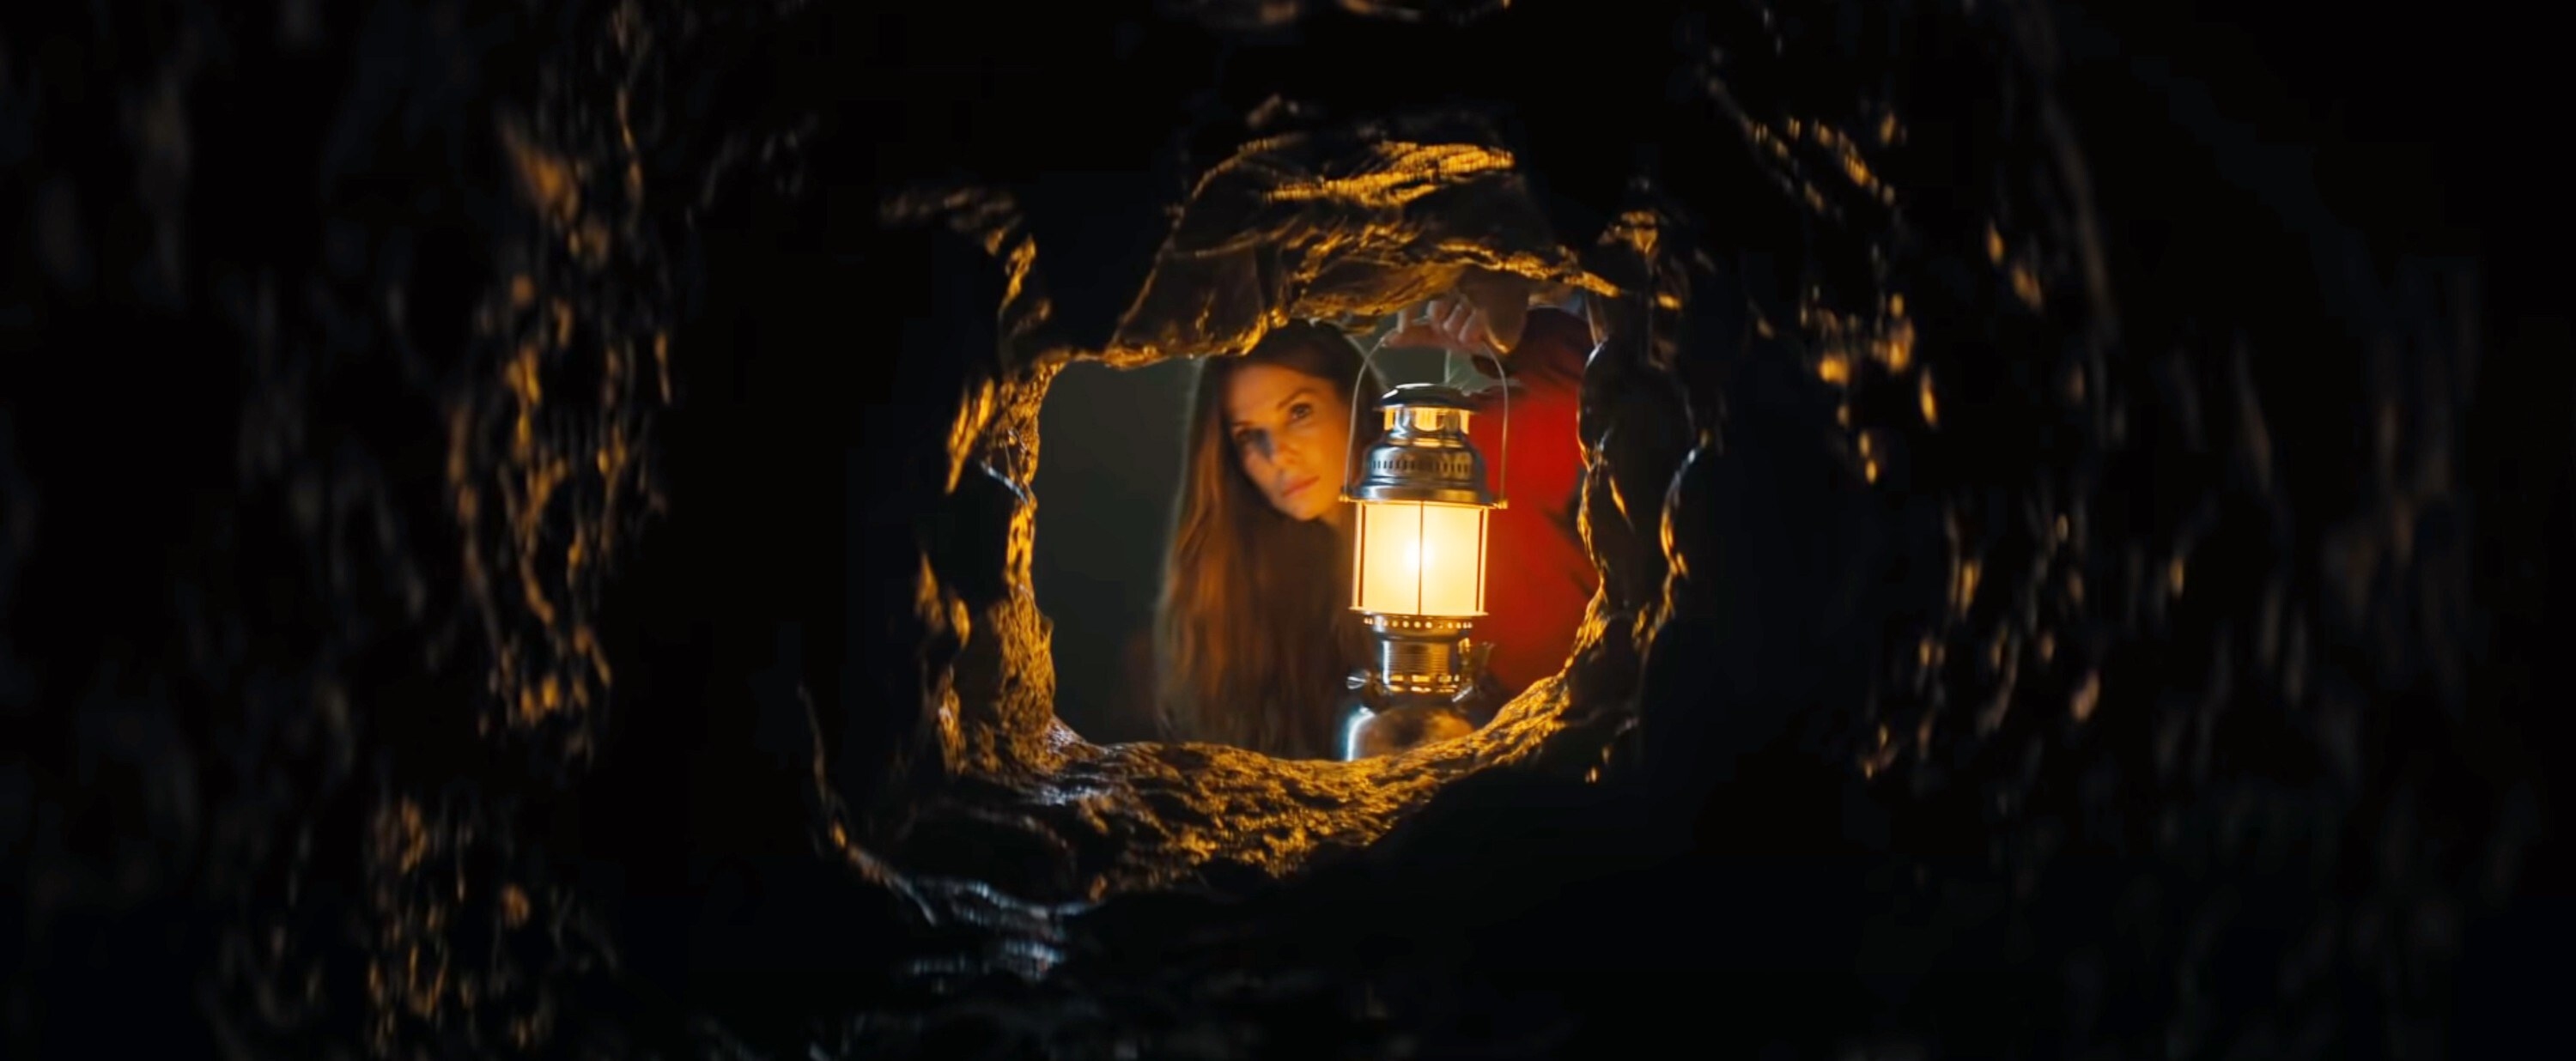 Sandra Bullock holding a lantern up to look through a tunnel in The Lost City